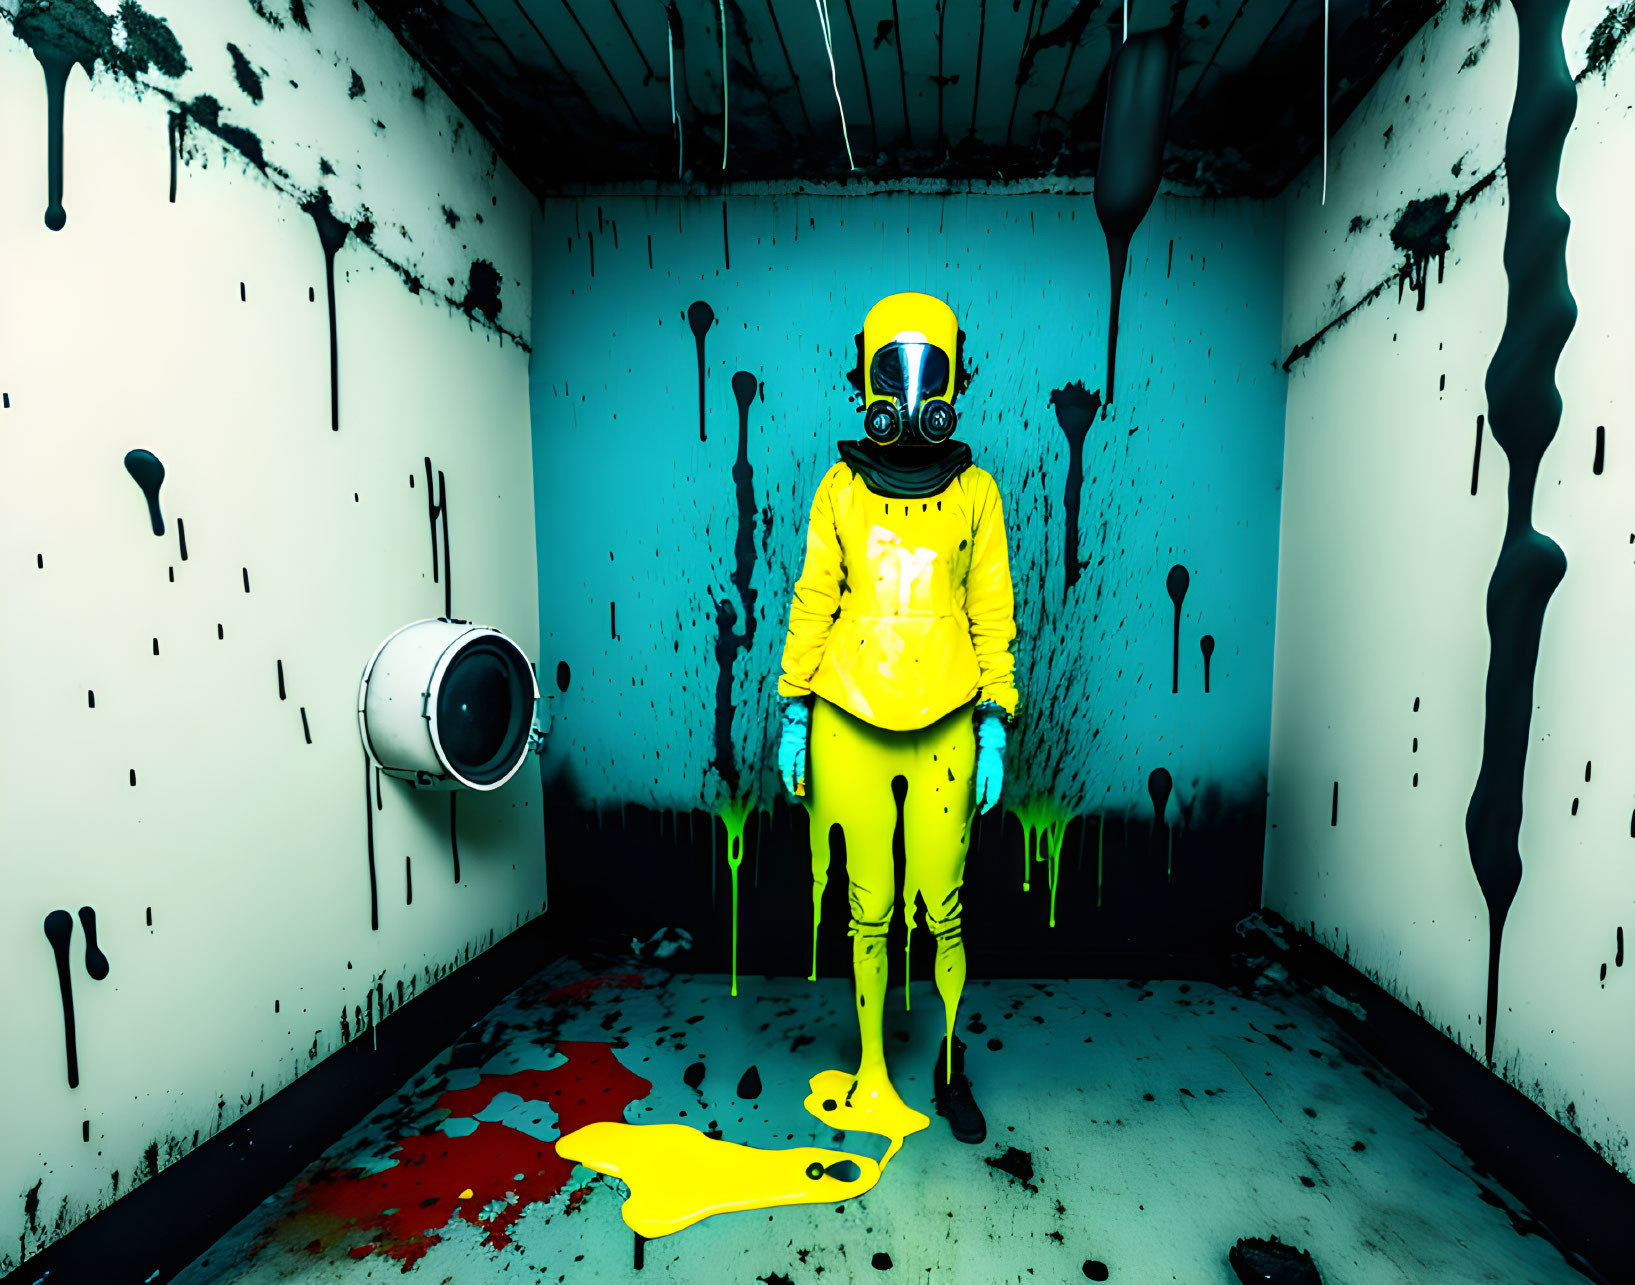 Person in yellow helmet in room with splattered black paint and yellow drips